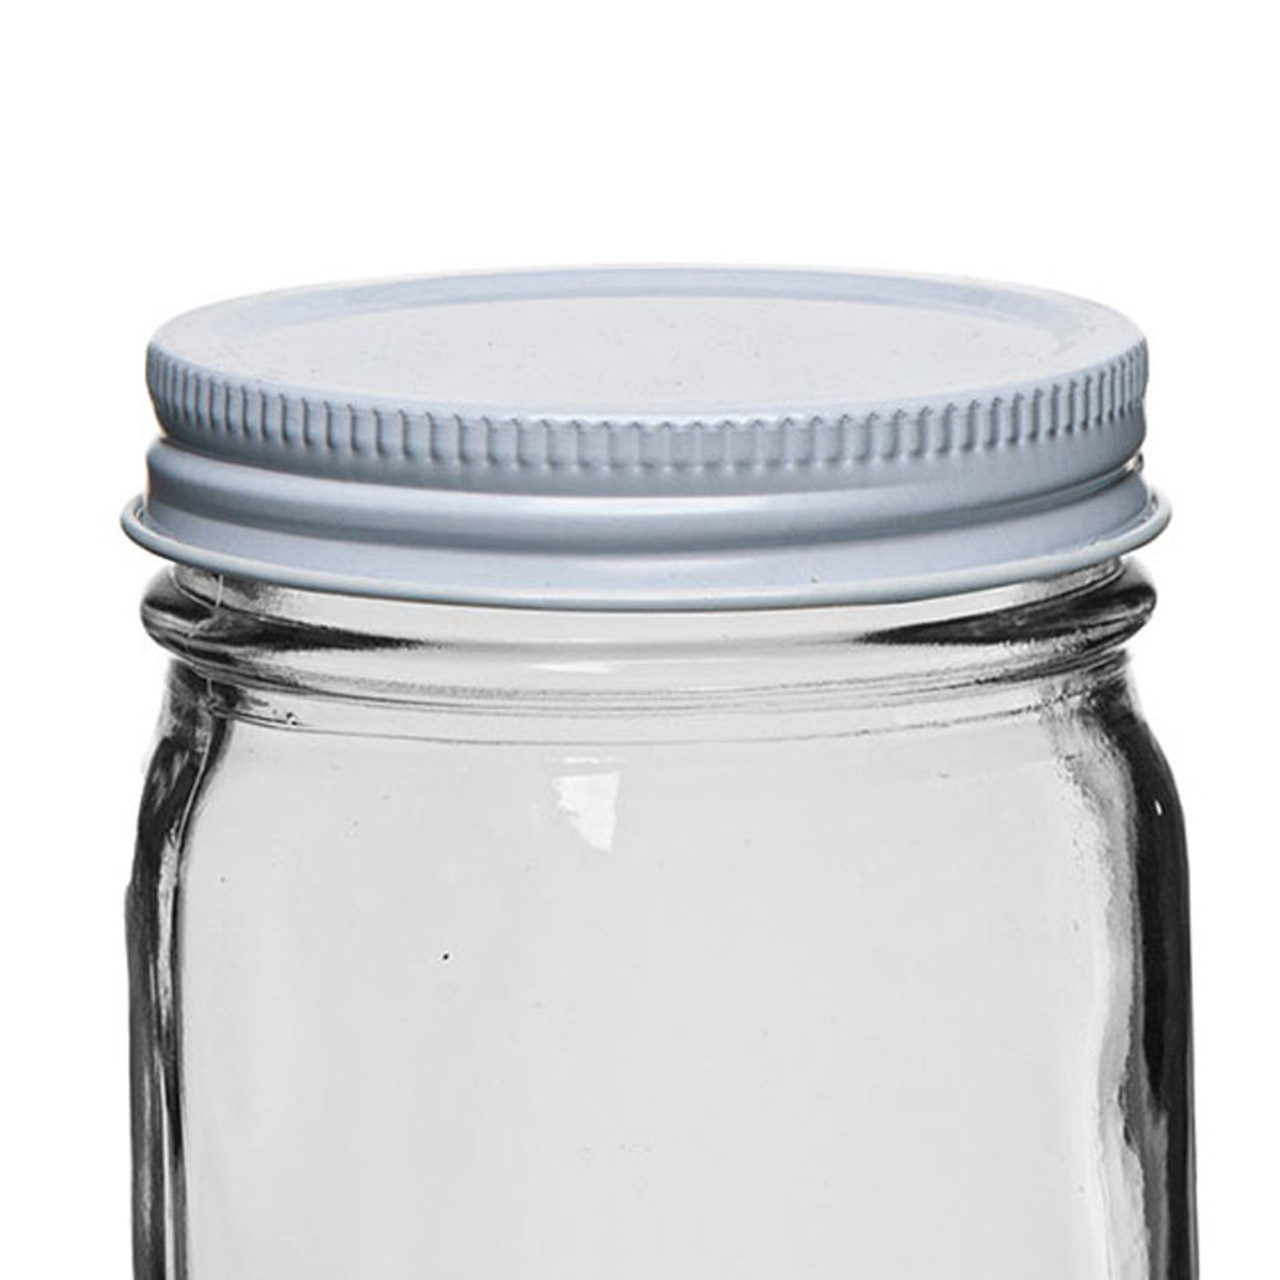 Jar Store Tin Container - Jar Store